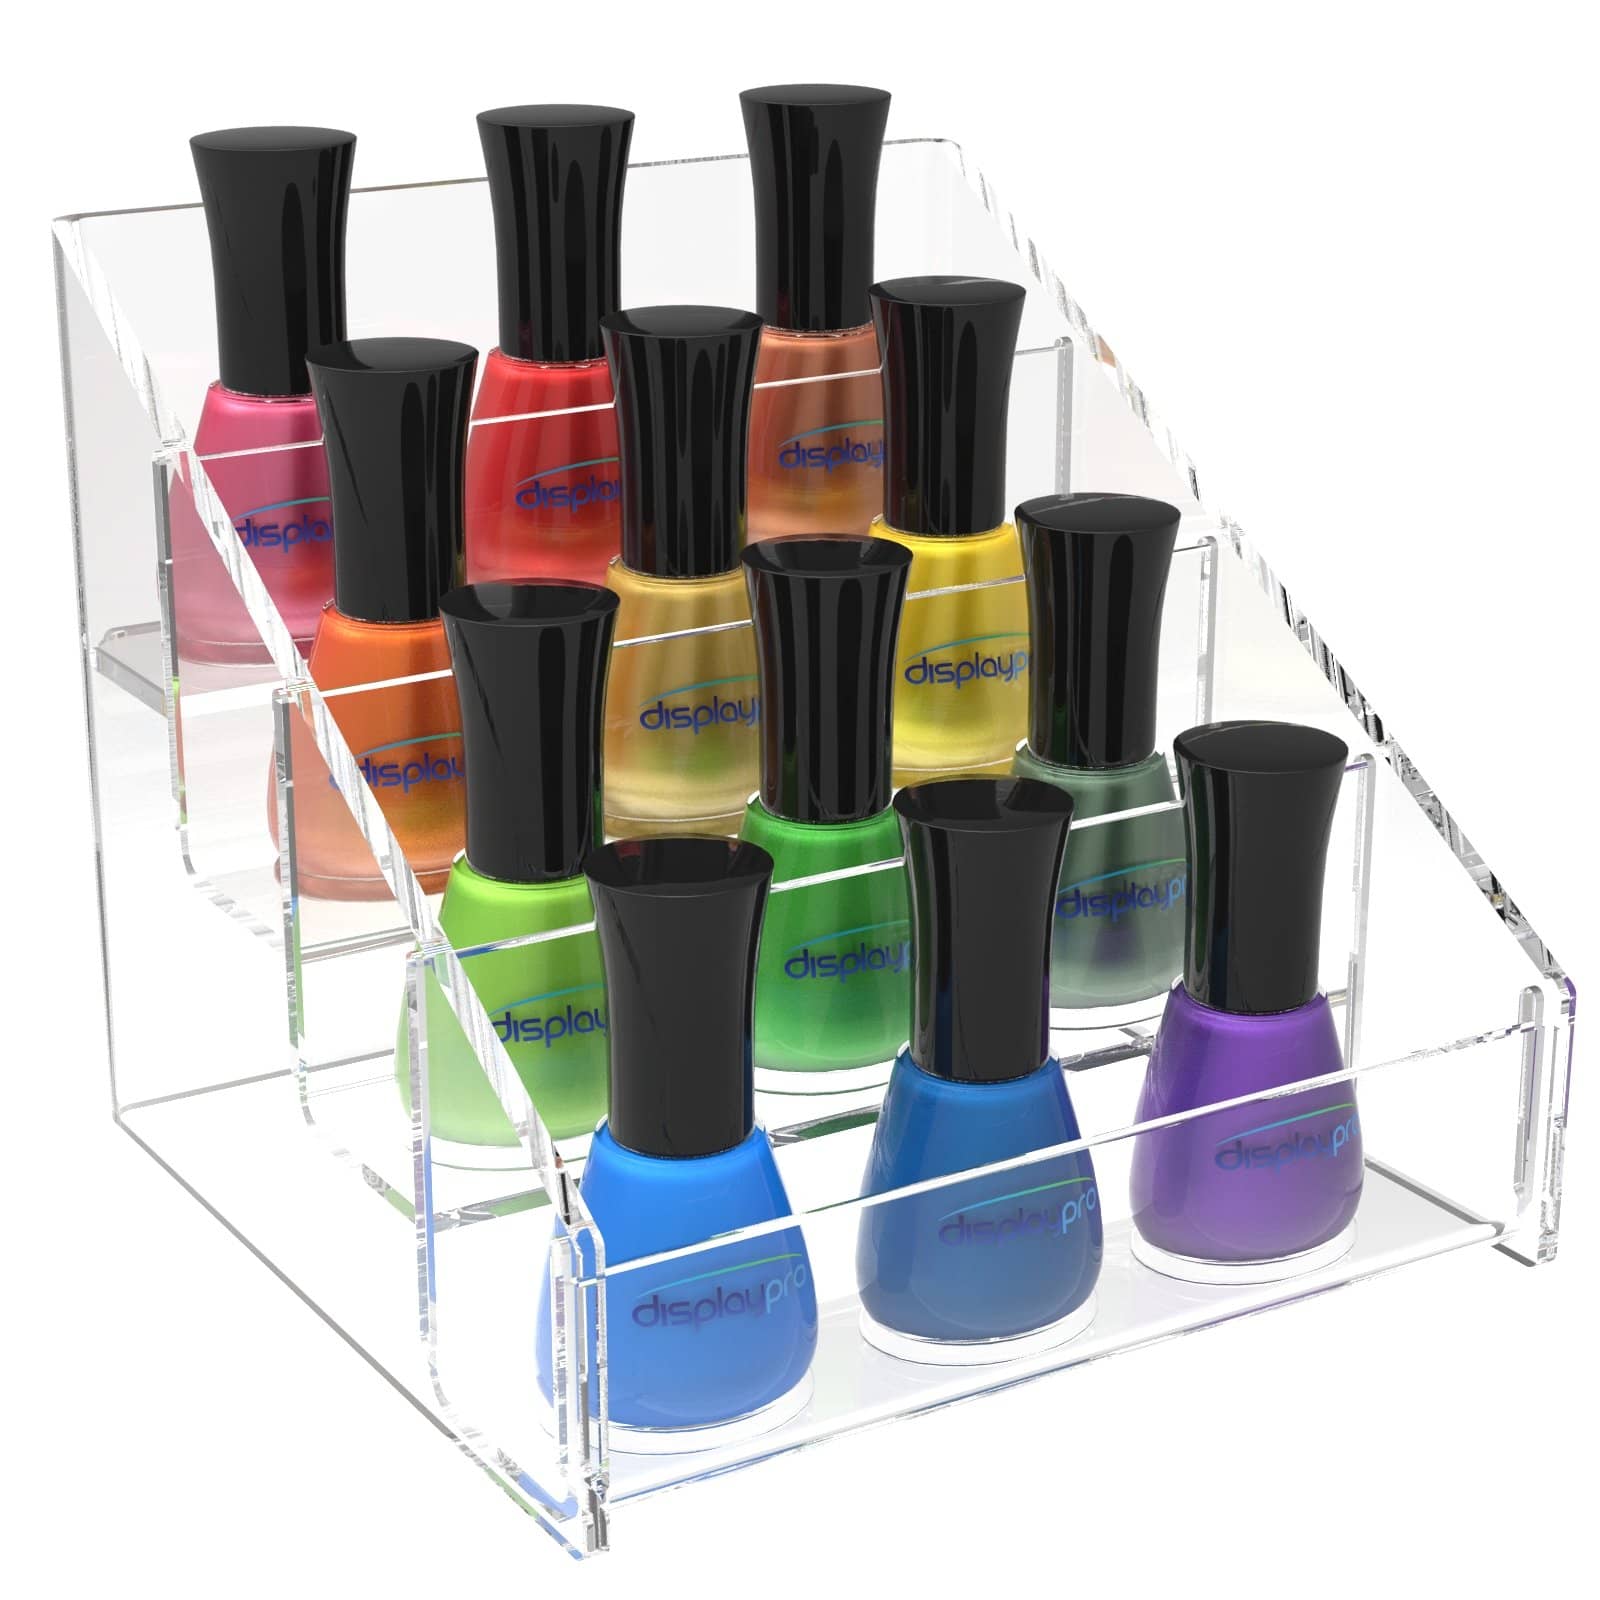 2018 Clear Acrylic Nail Polish Holder With Perfect Makeup Stand Organizer  For Wholesale Storage From Gegezeng, $8.44 | DHgate.Com